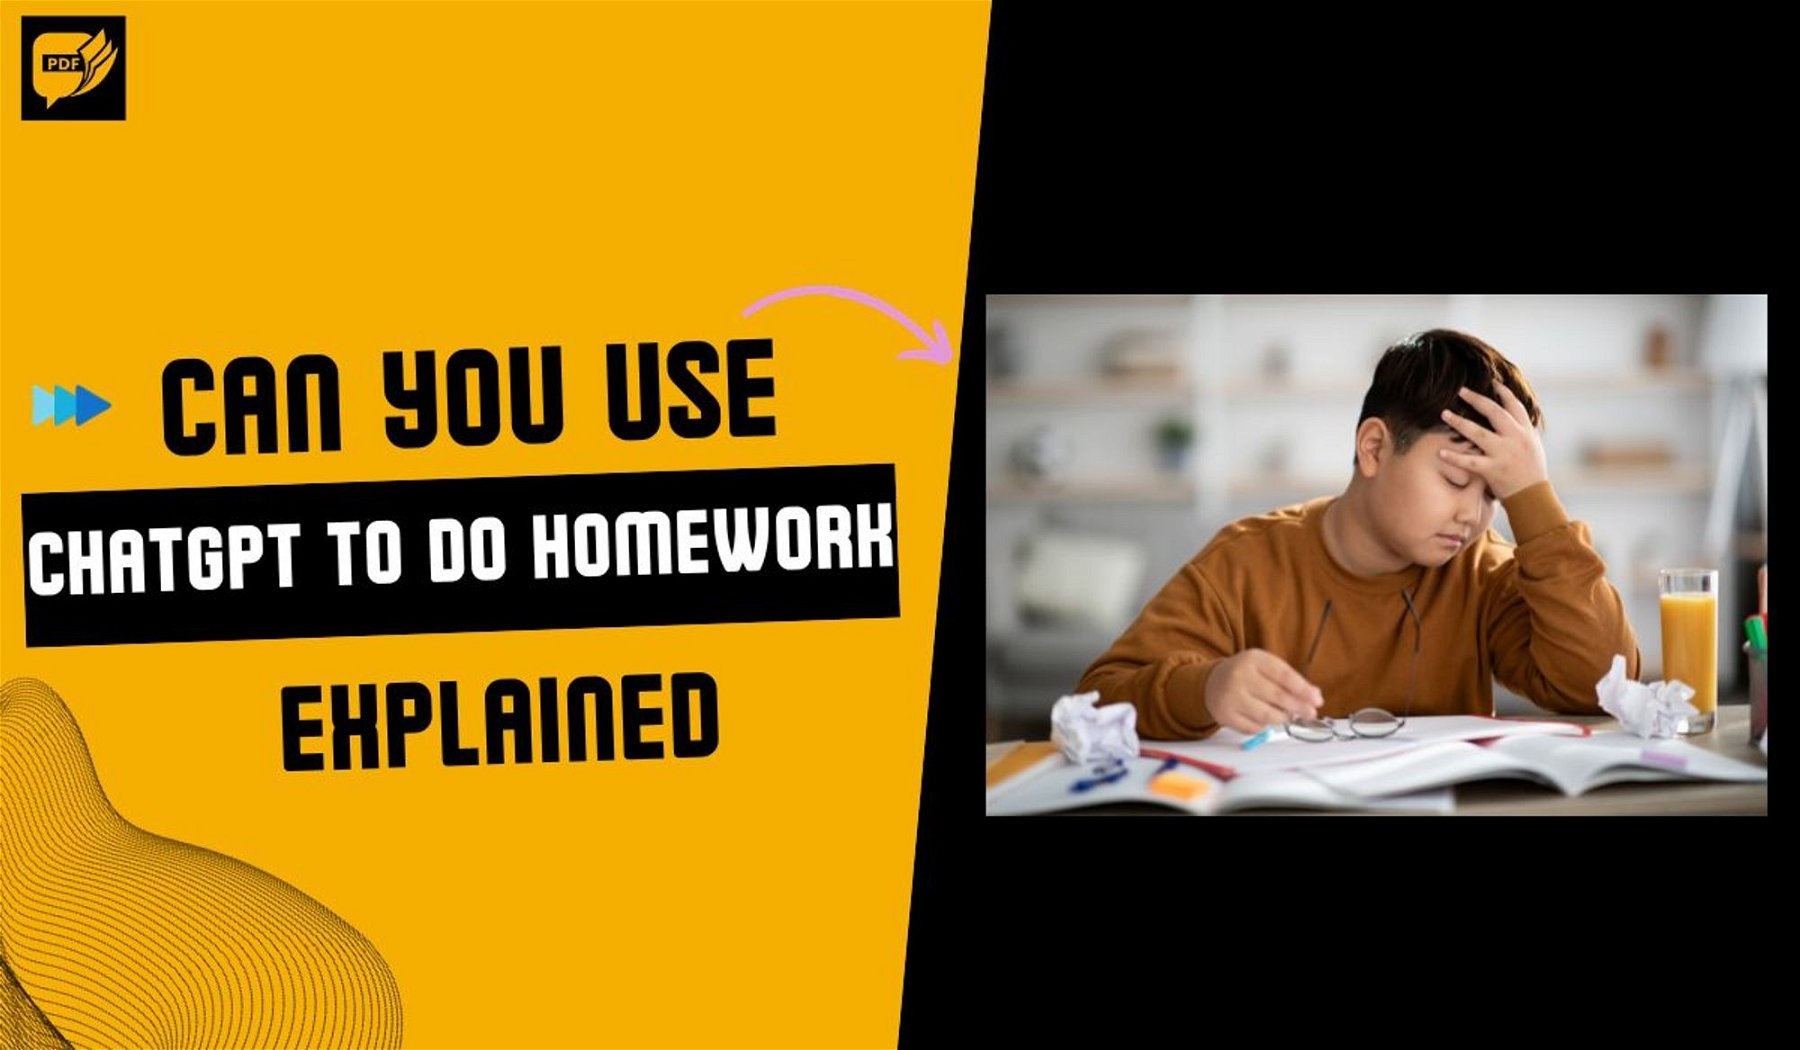 Can you use ChatGPT to do homework?